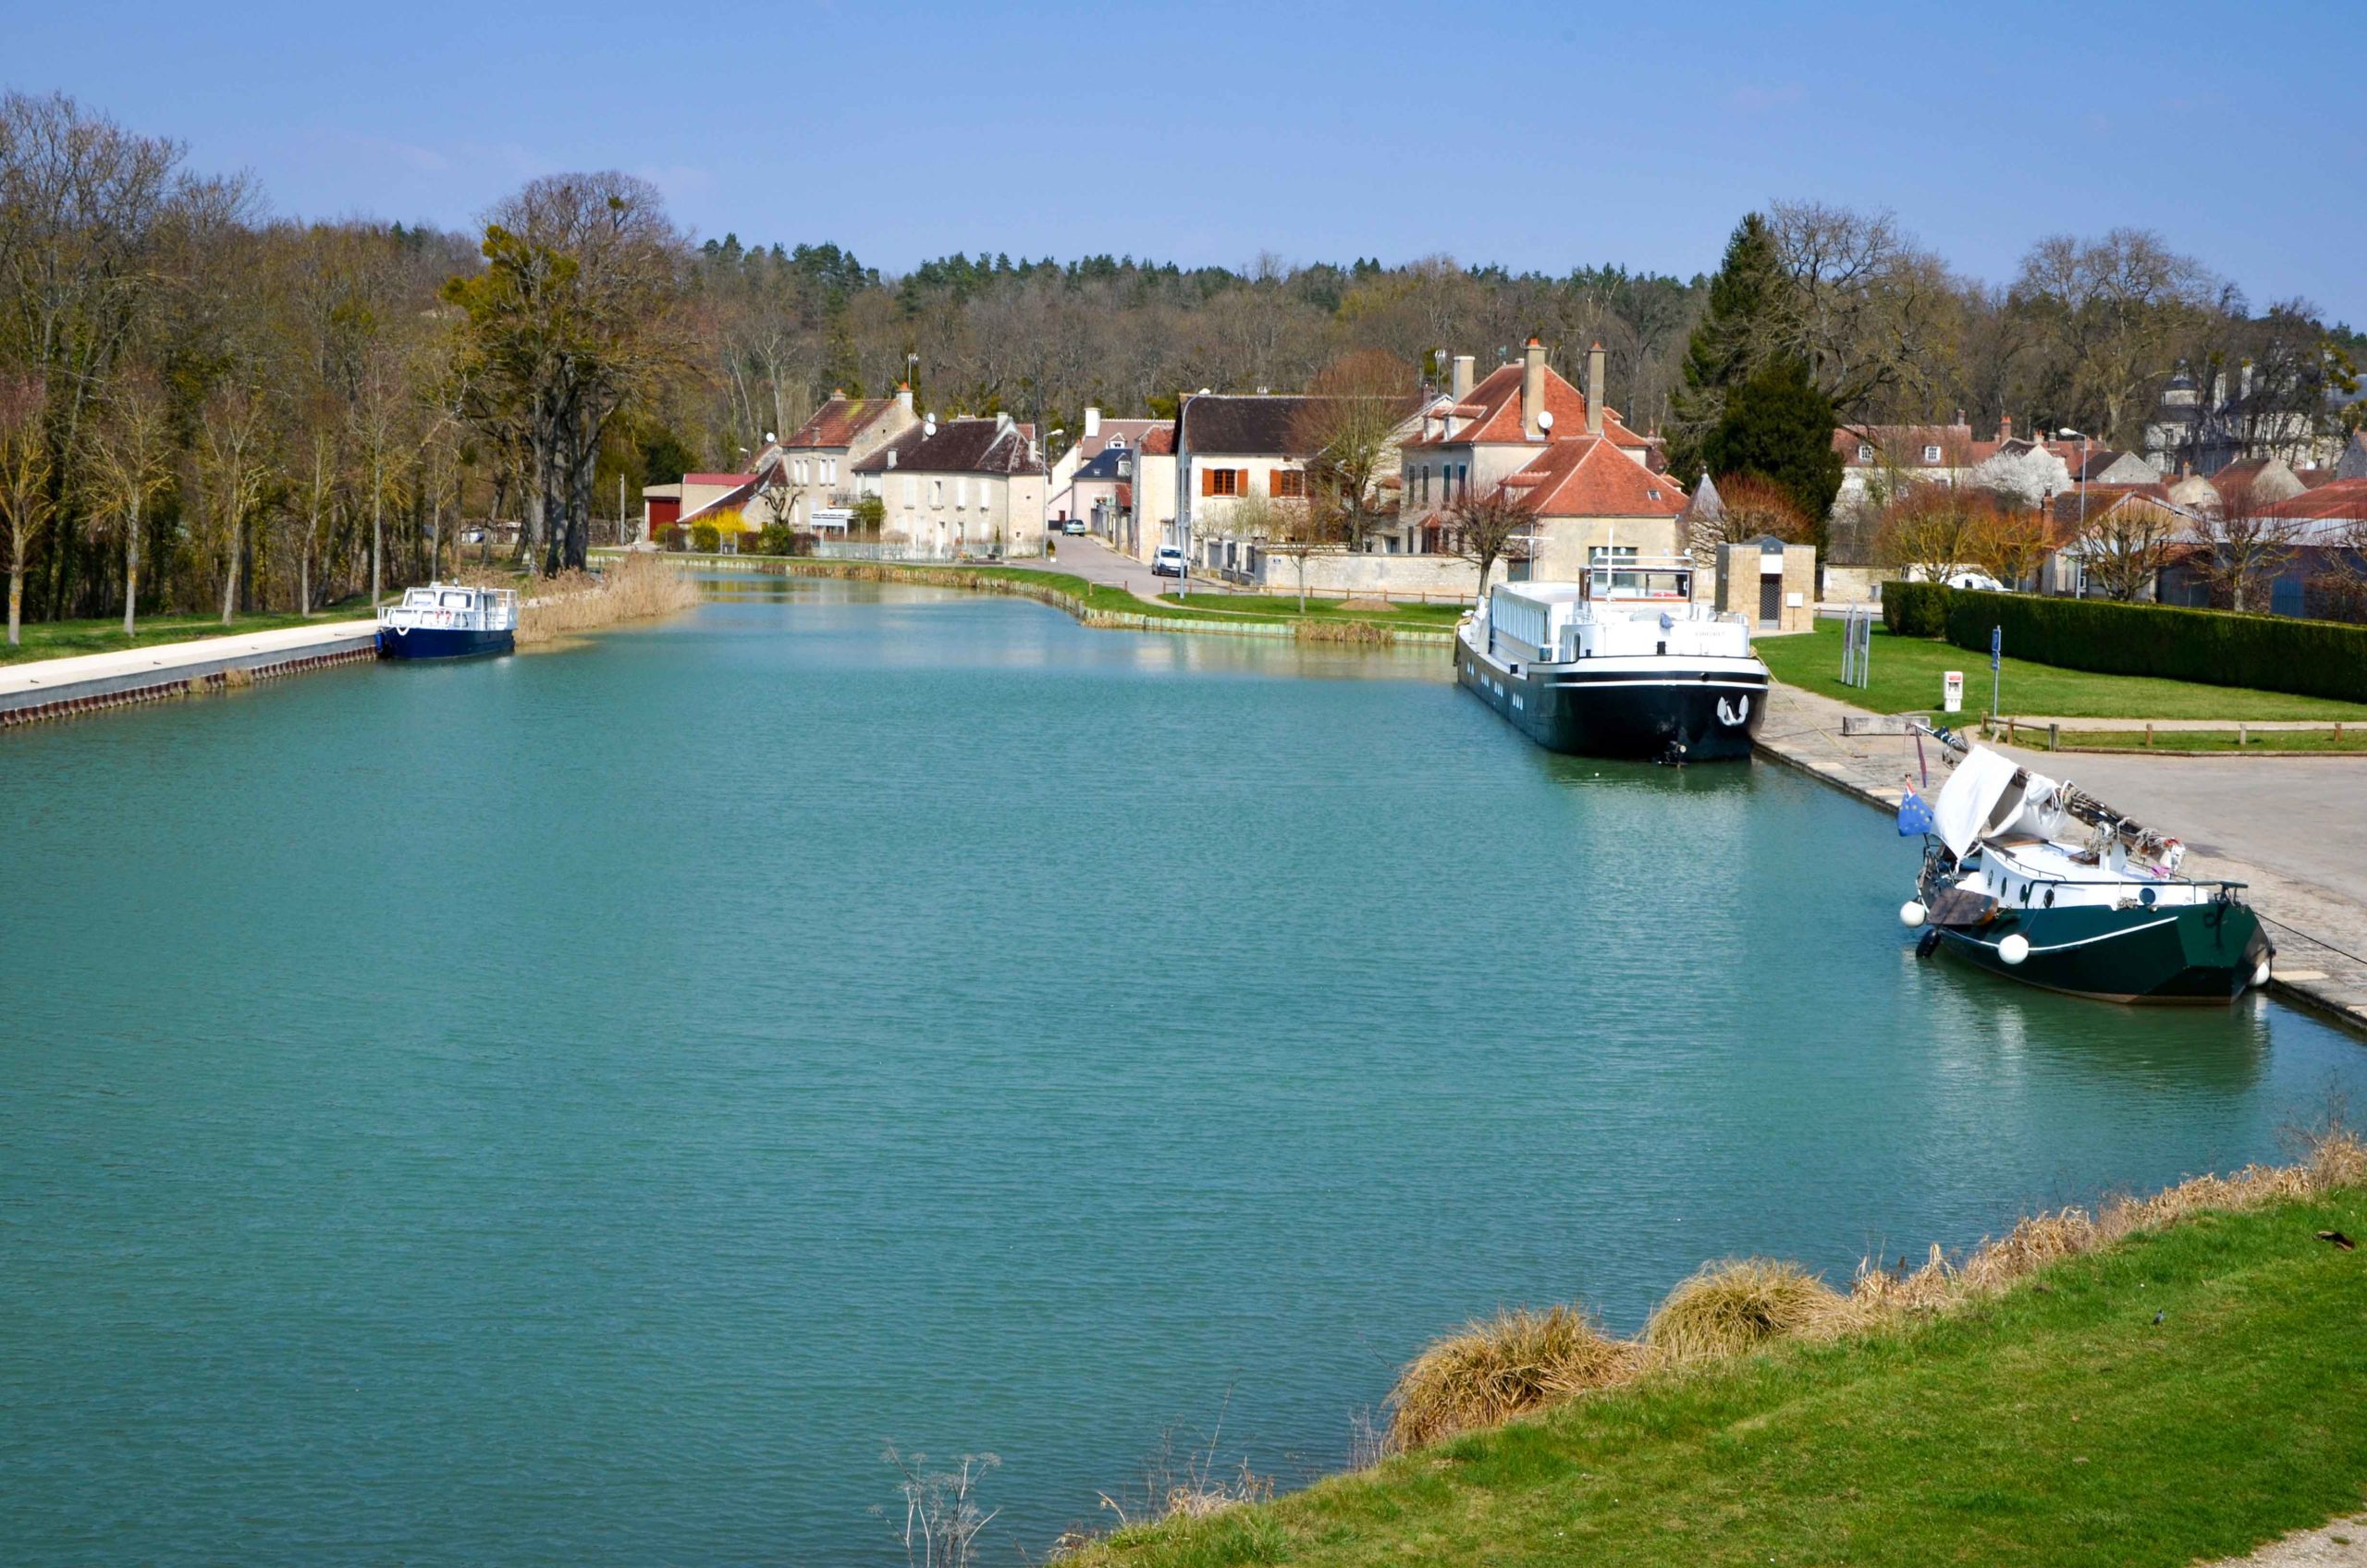 The marina of the Canal de Bourgogne at Tanlay © Pline - licence [CC BY-SA 3.0] from Wikimedia Commons